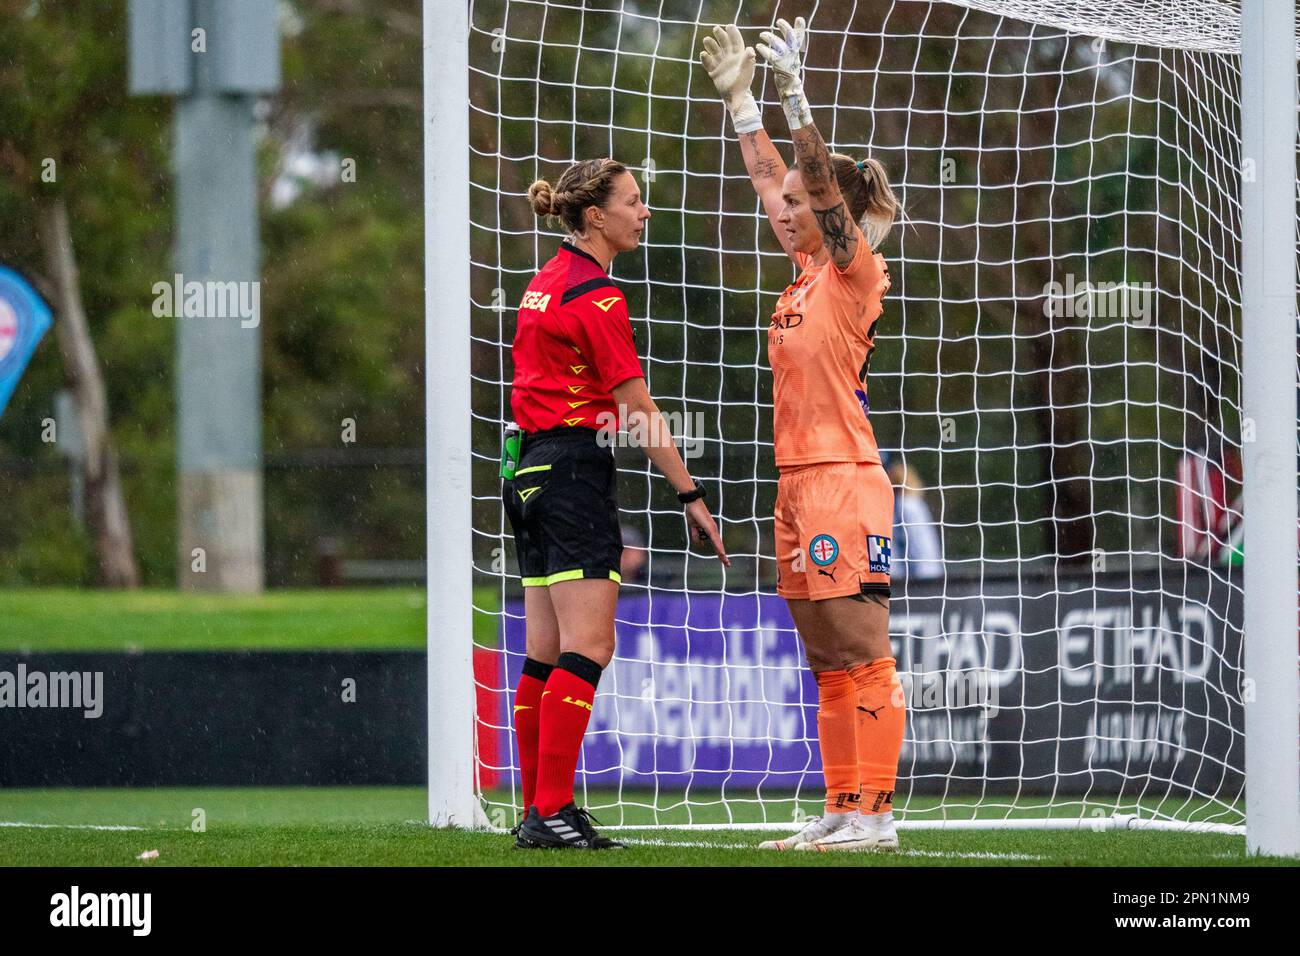 Cranbourne East, Australia. 15 April 2023. The match referee reminds Melbourne City keeper Melissa Barbieri (#23) to stay behind the line as the penalty kick is taken. Credit: James Forrester/Alamy Live News Stock Photo